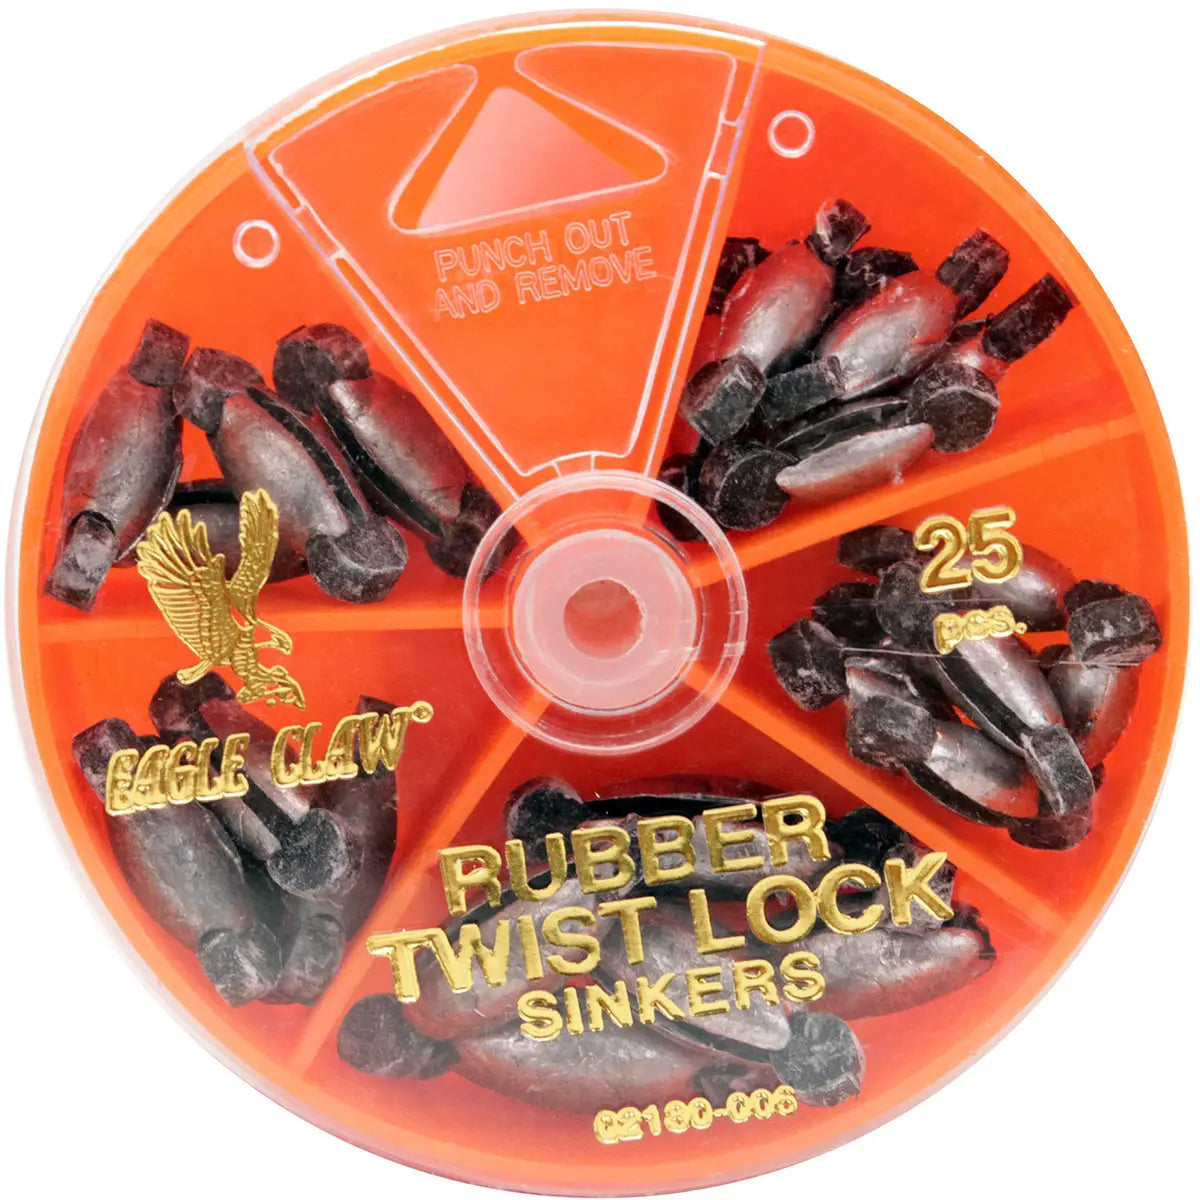 Eagle Claw Rubber Core Twist-Lock Sinkers Dial Pack Eagle Claw